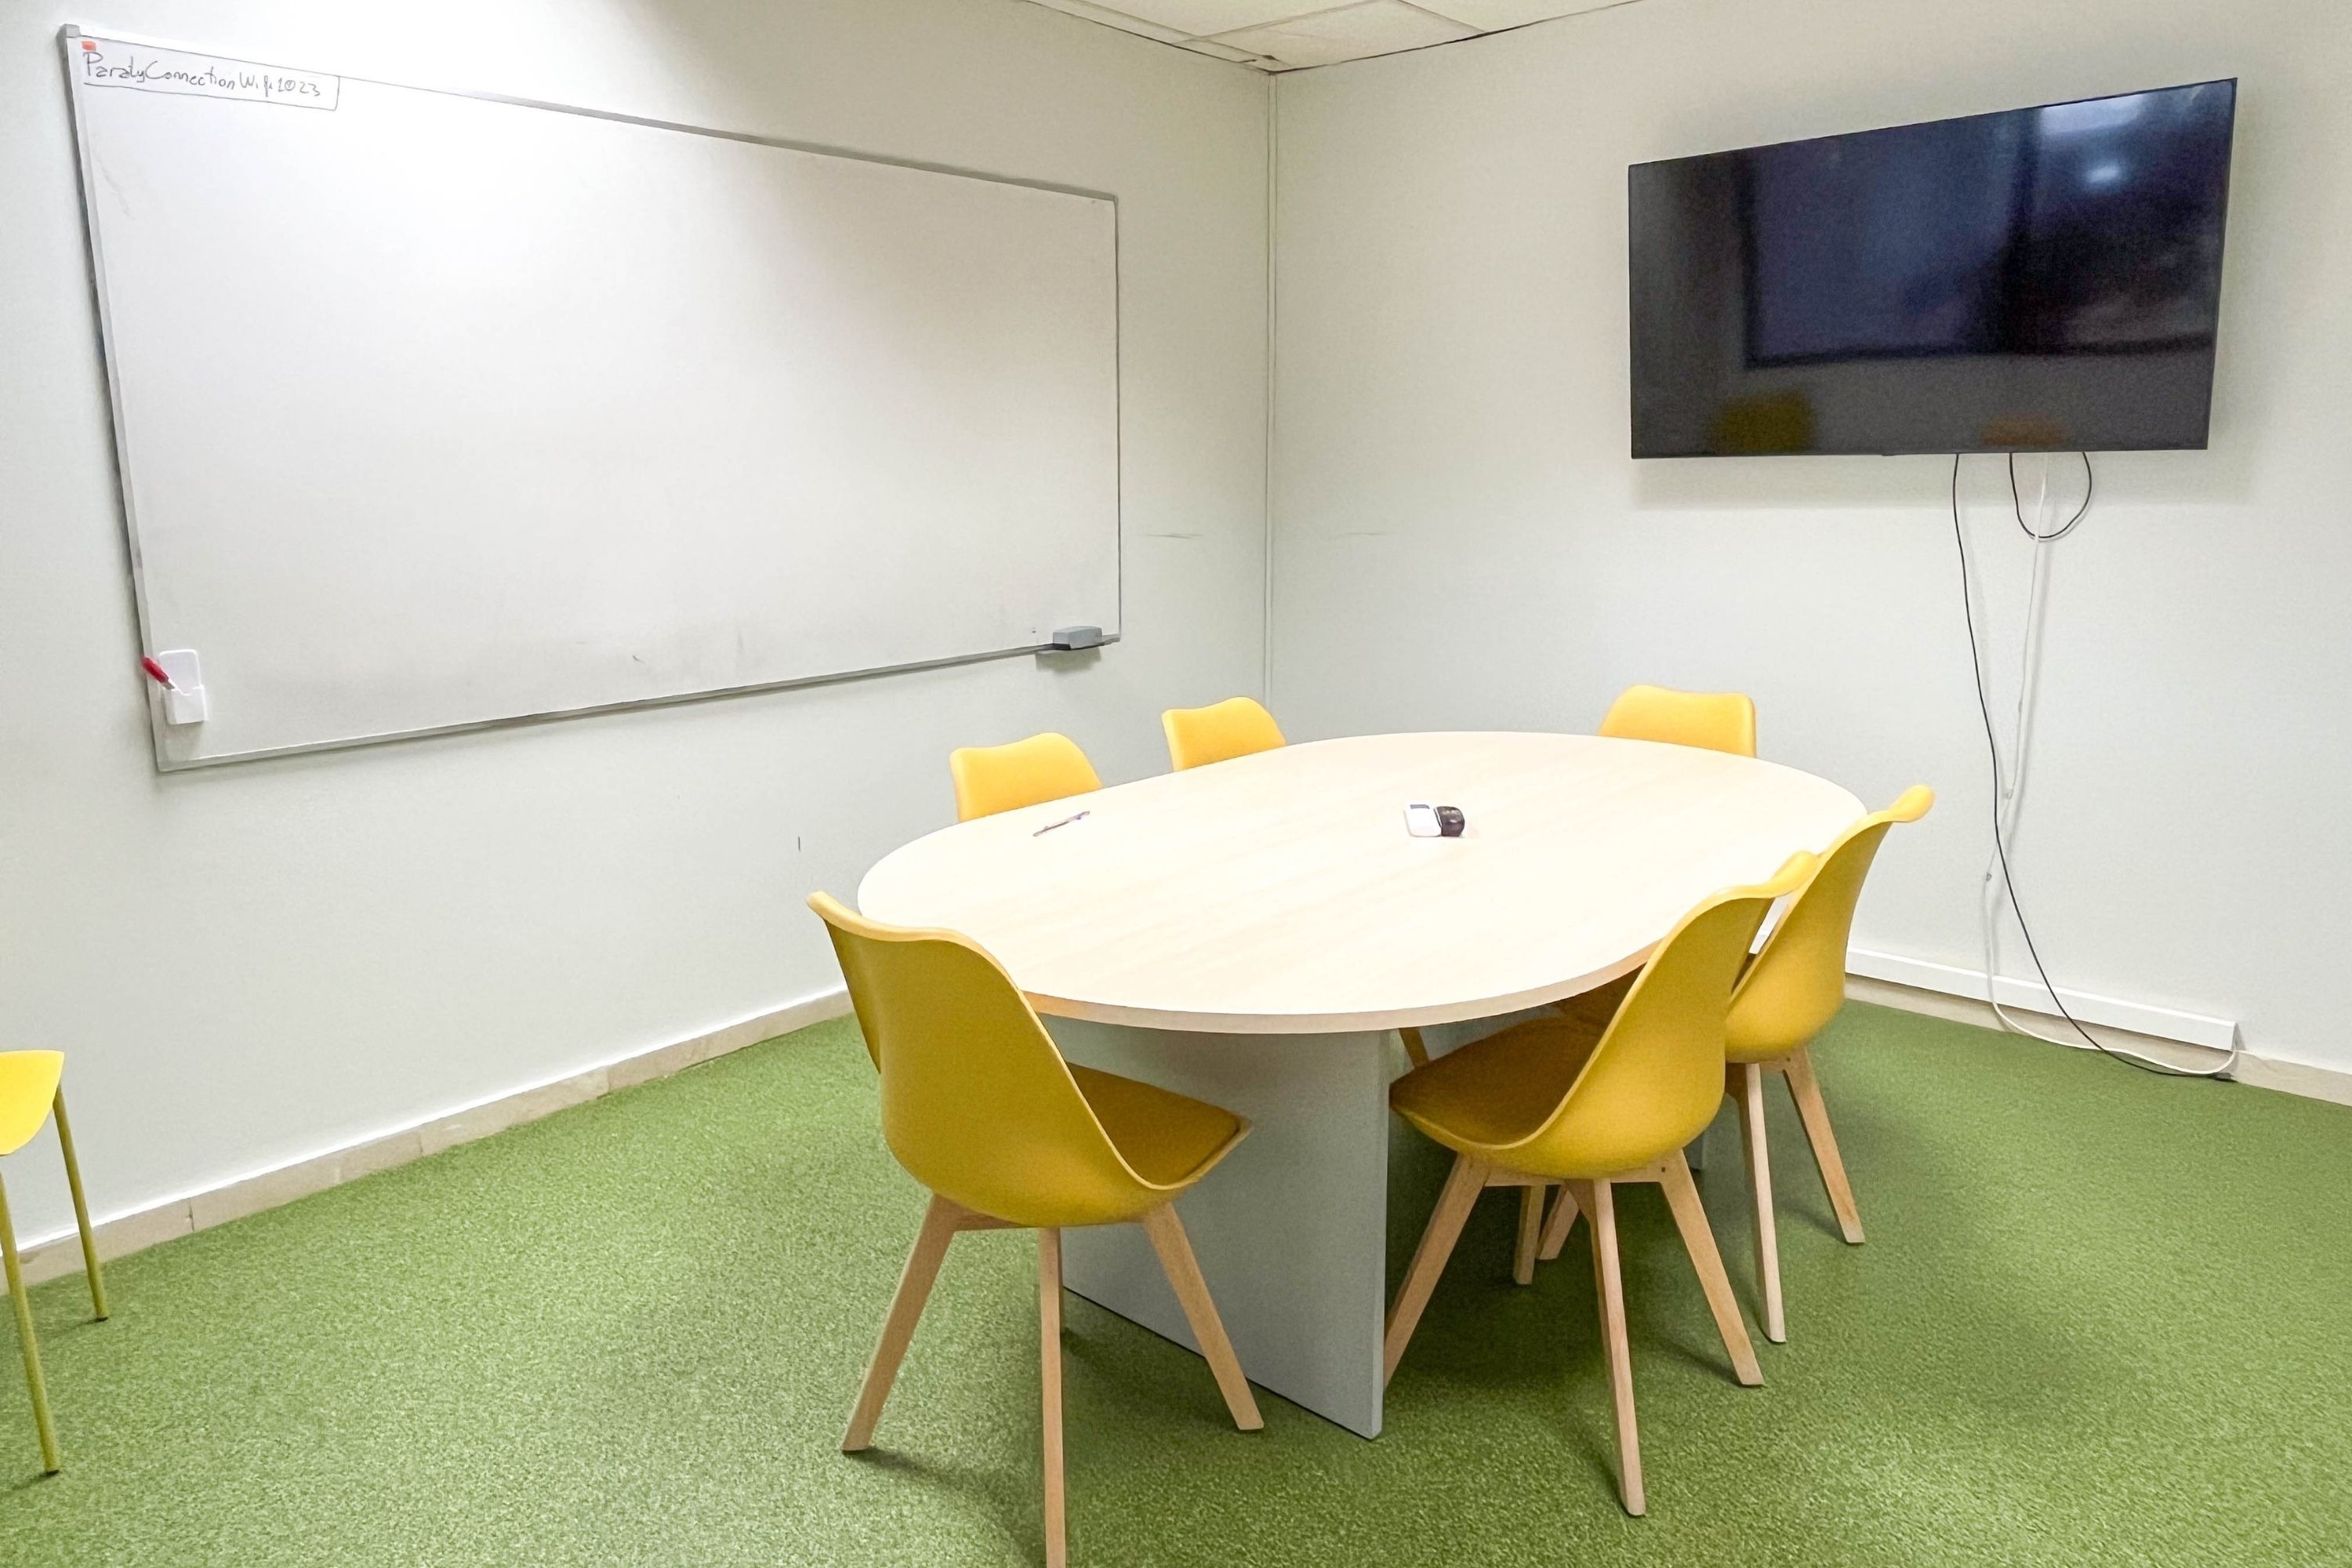 a conference room with a round table and yellow chairs